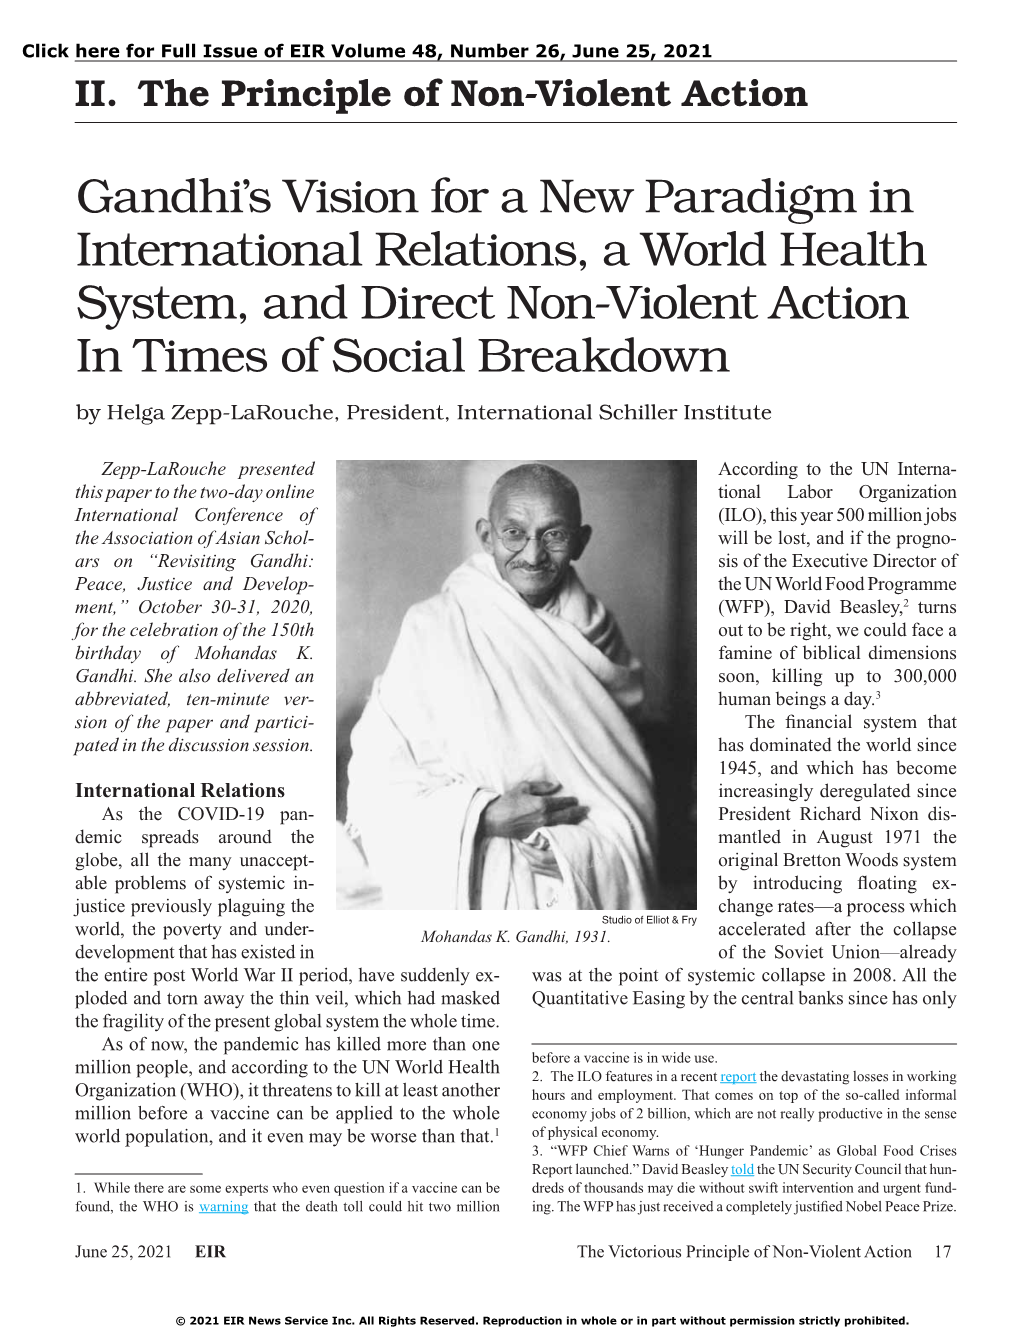 Gandhi's Vision for a New Paradigm in International Relations, a World